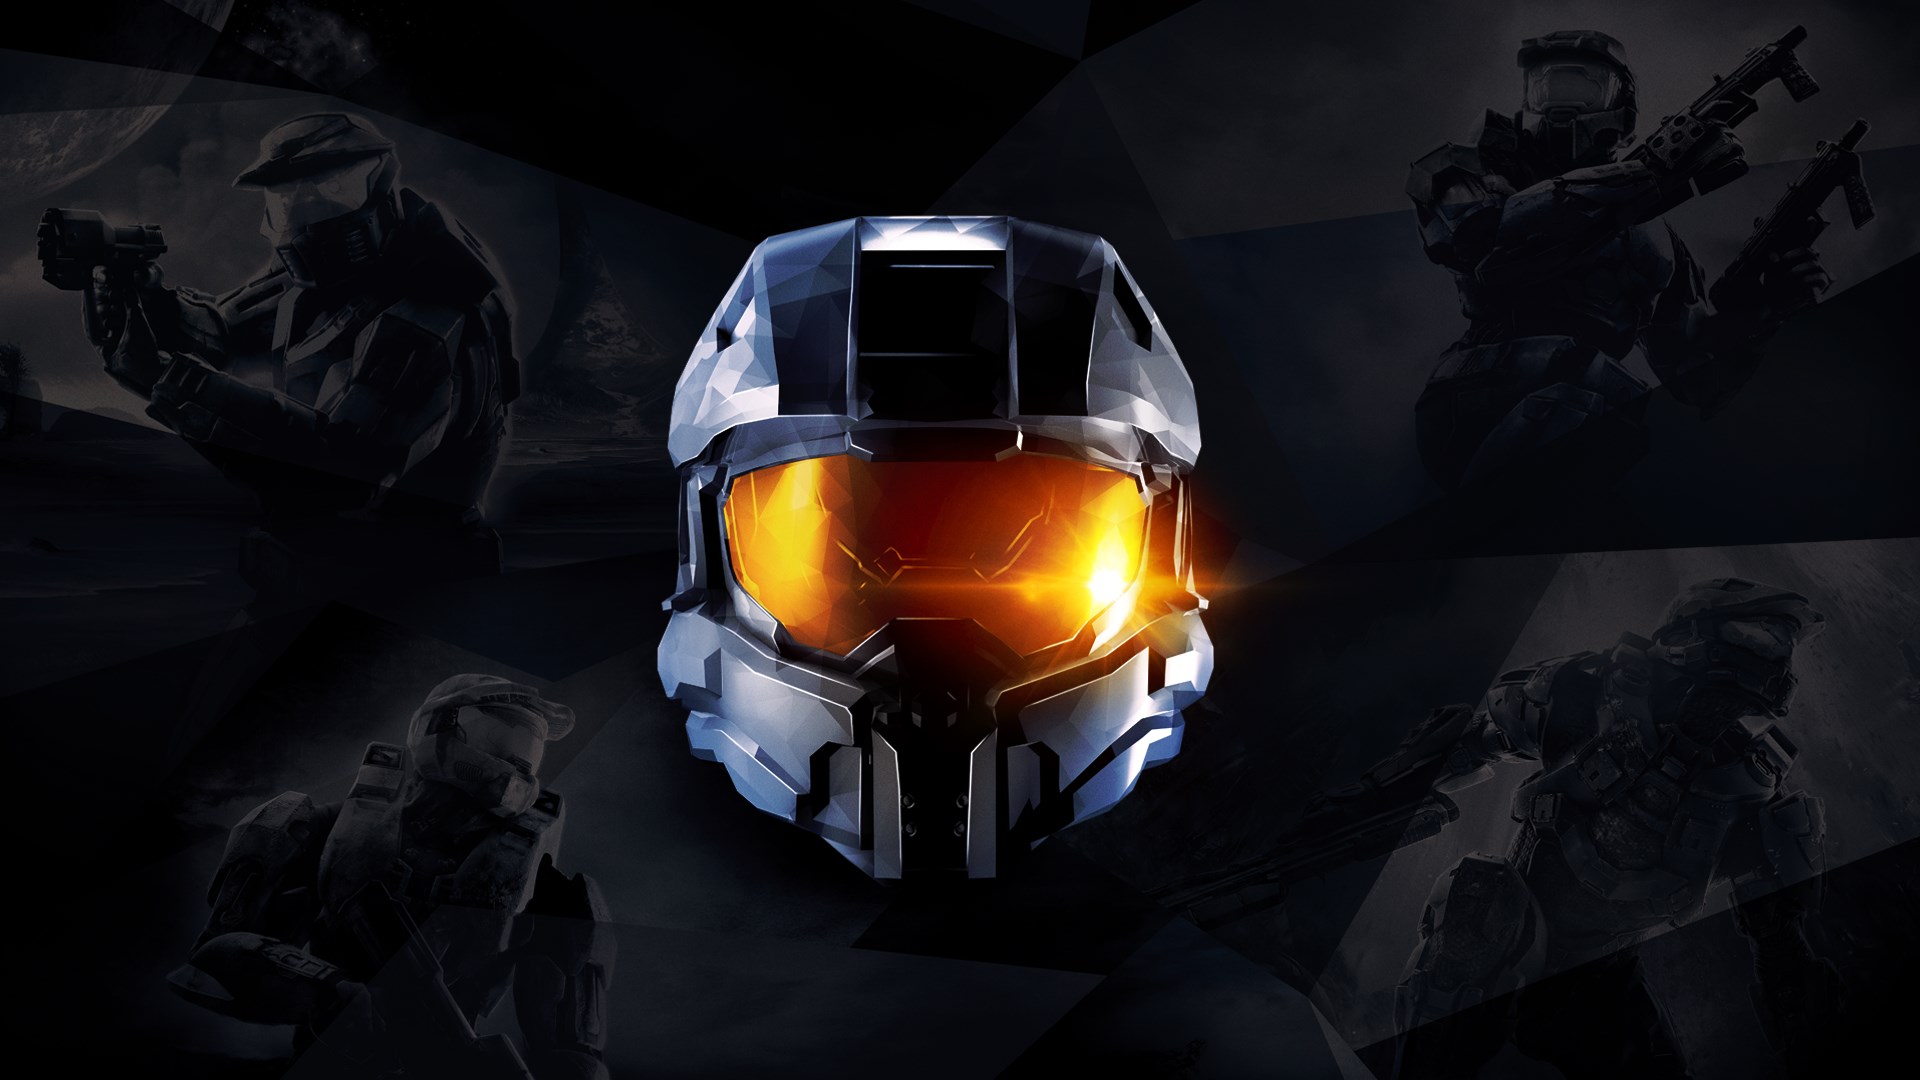 Halo The Master Chief Collection Halo Reach Repack Free Download | Everything Download